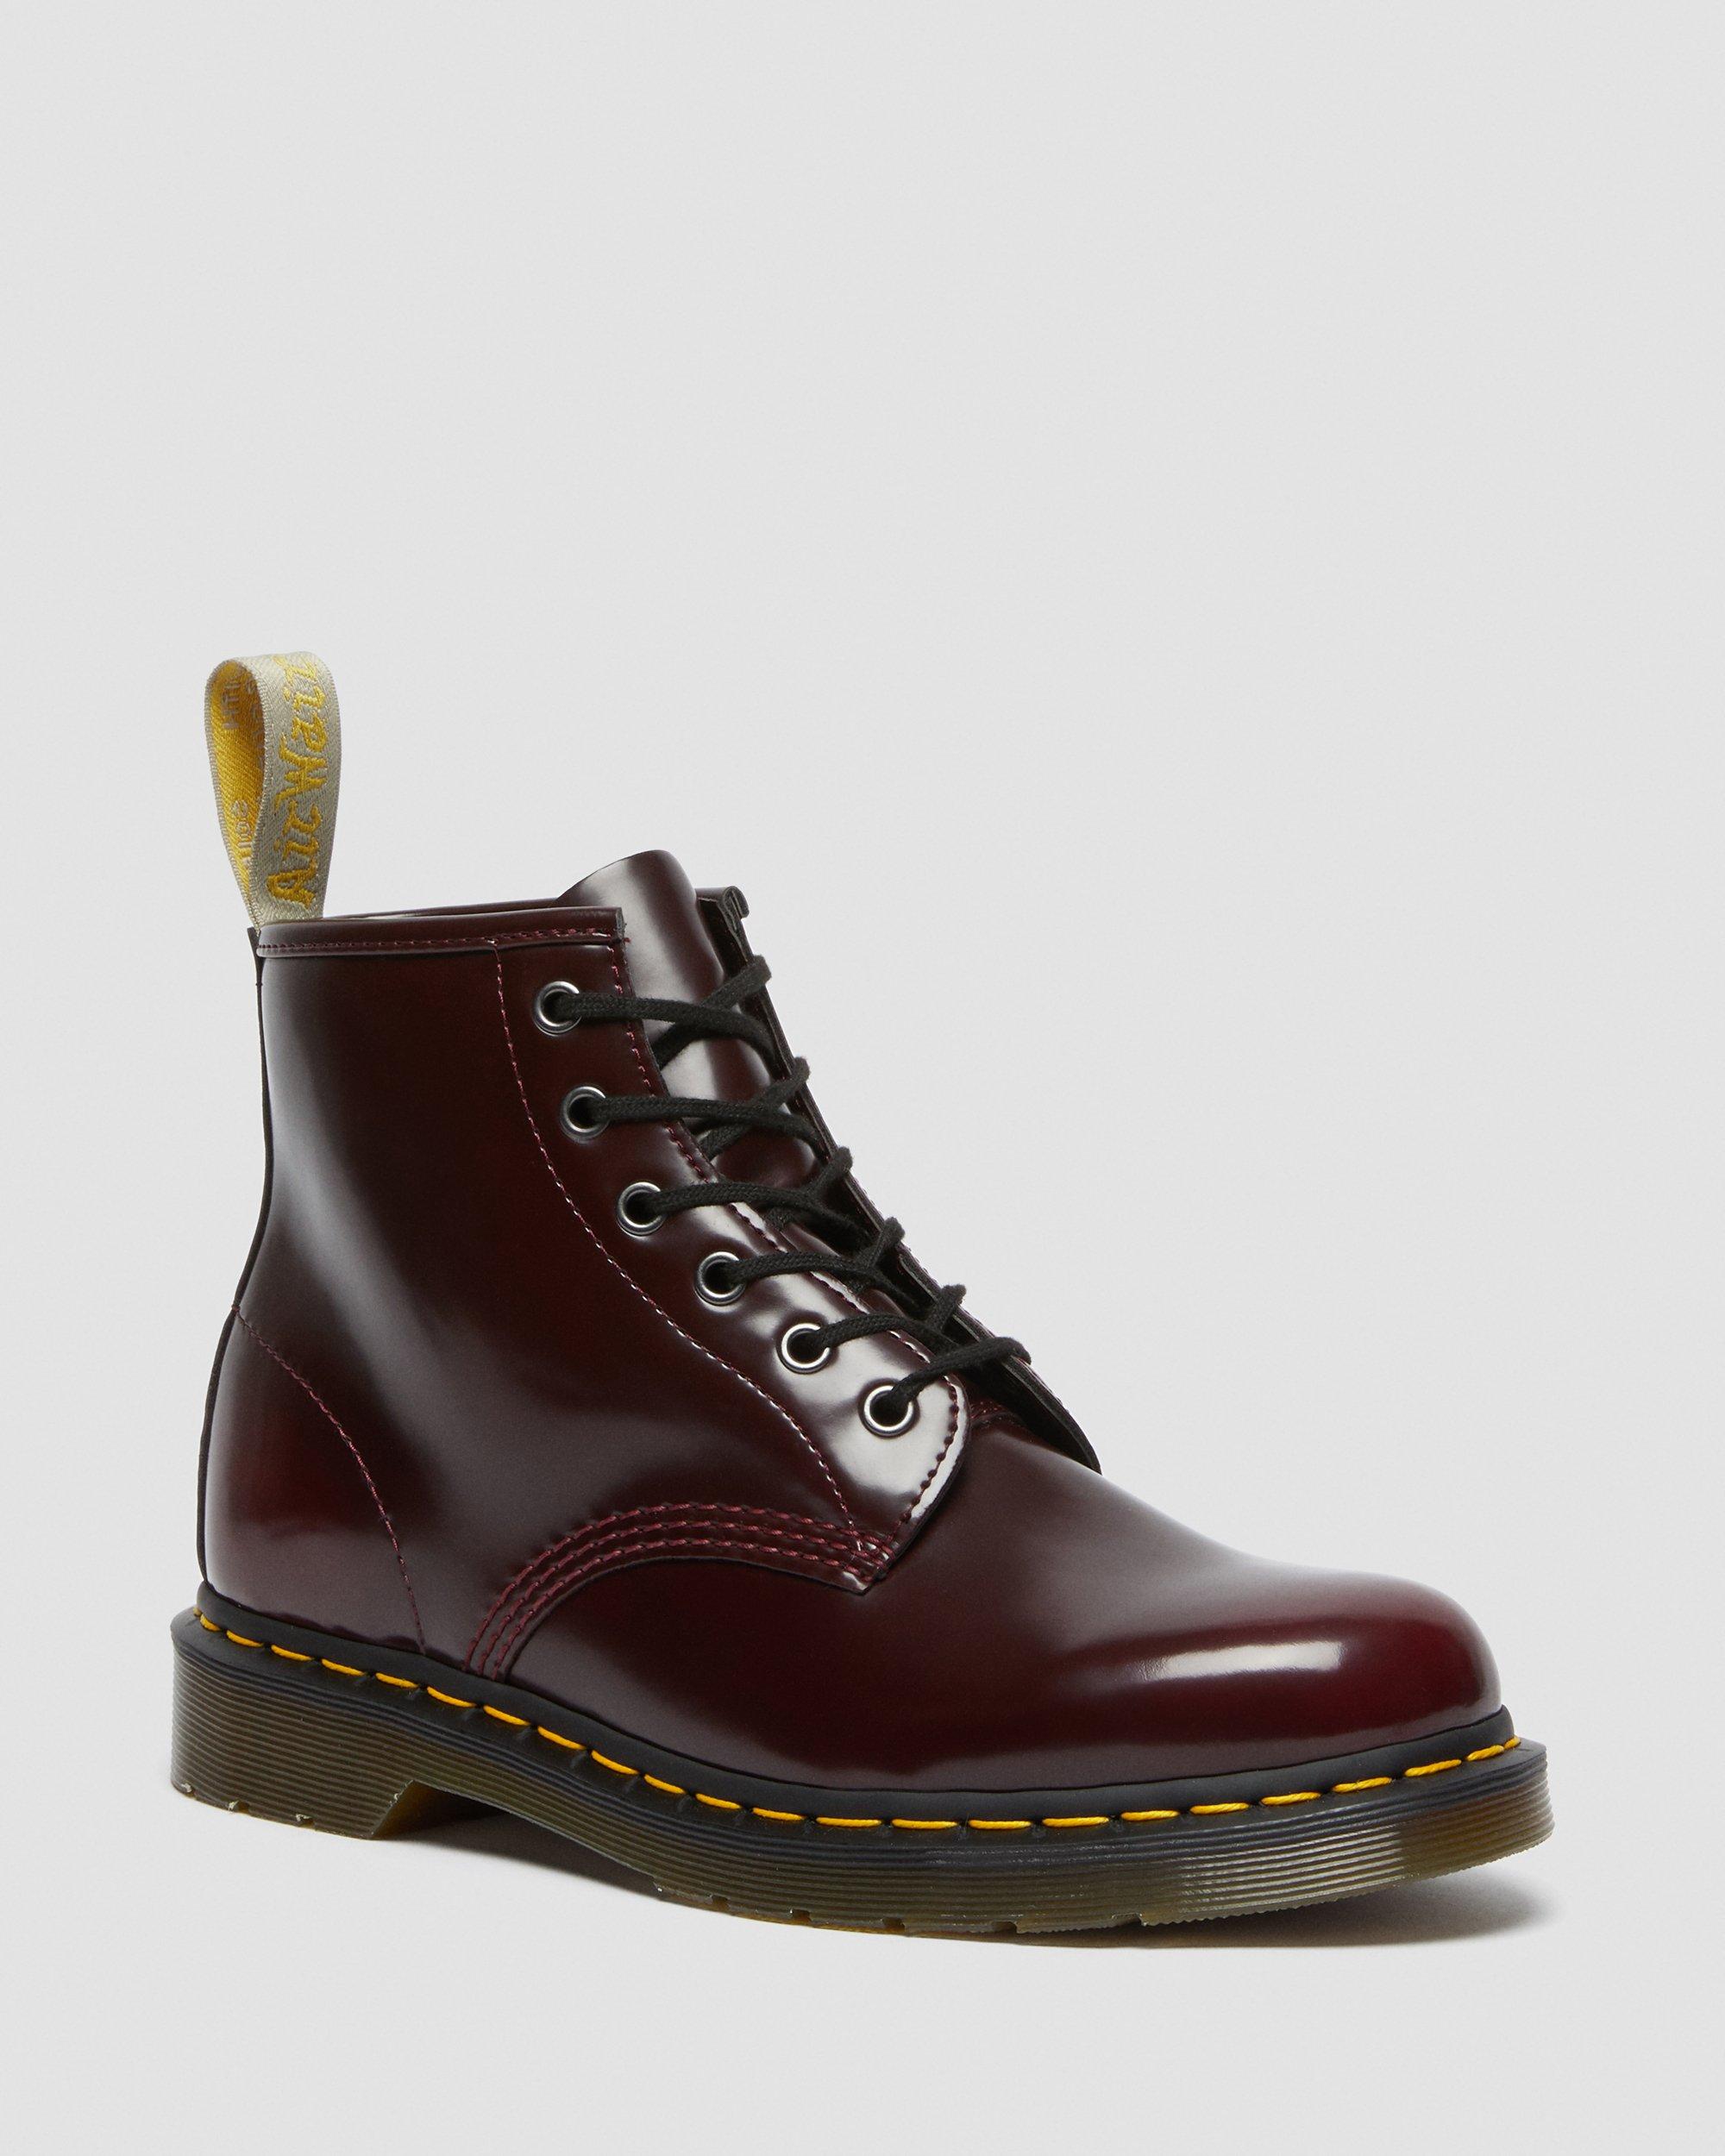 Vegan 101 Ankle Boots in Cherry Red | Dr. Martens